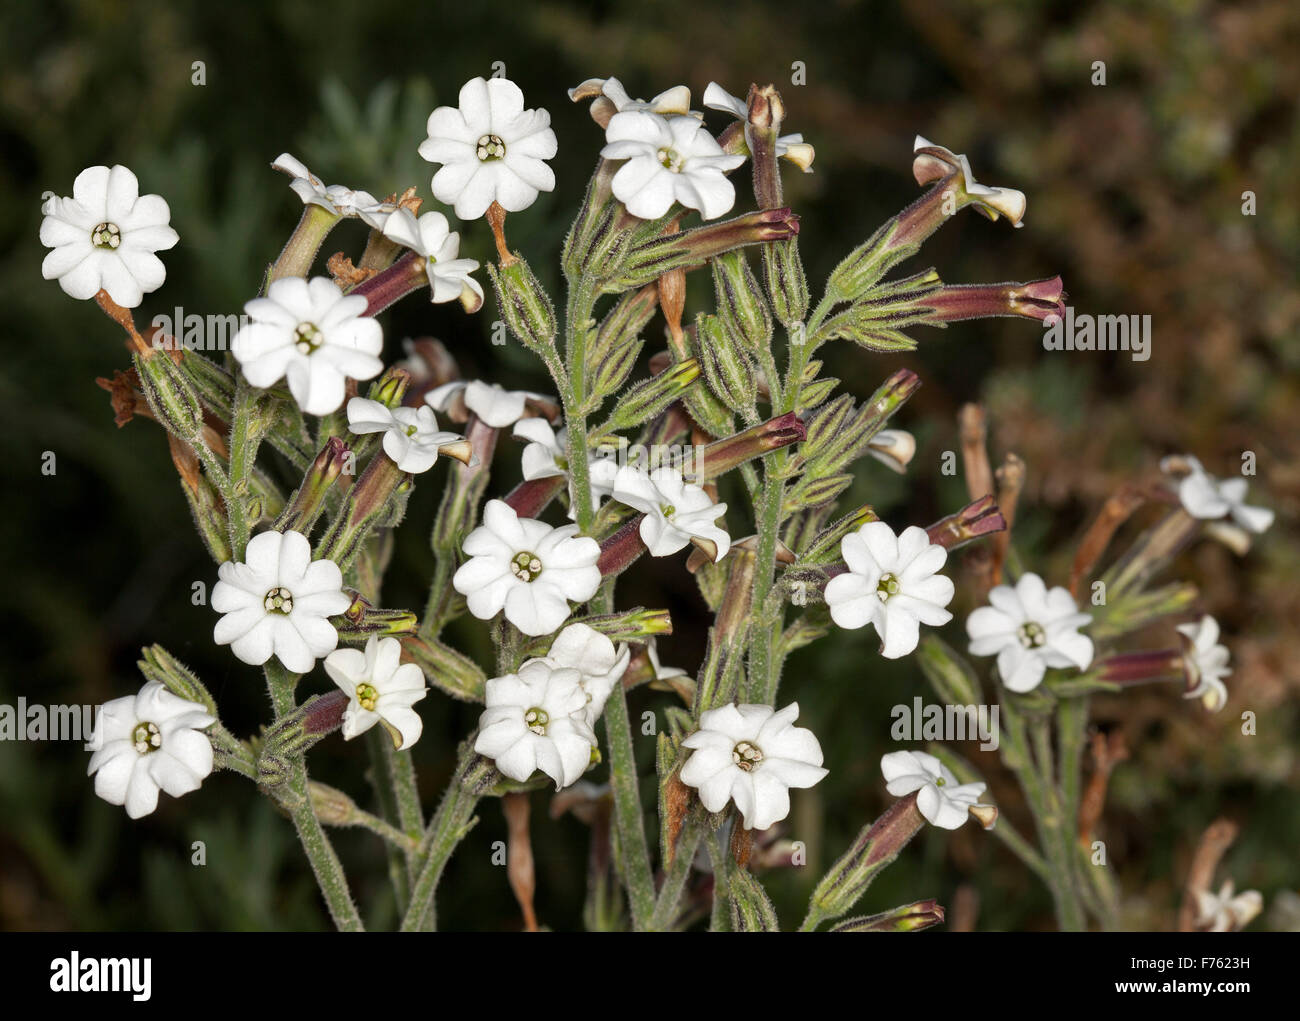 Cluster of pretty white perfumed flowers of Nicotinia velutina, native/ velvet tobacco growing in outback Australia, on dark background Stock Photo